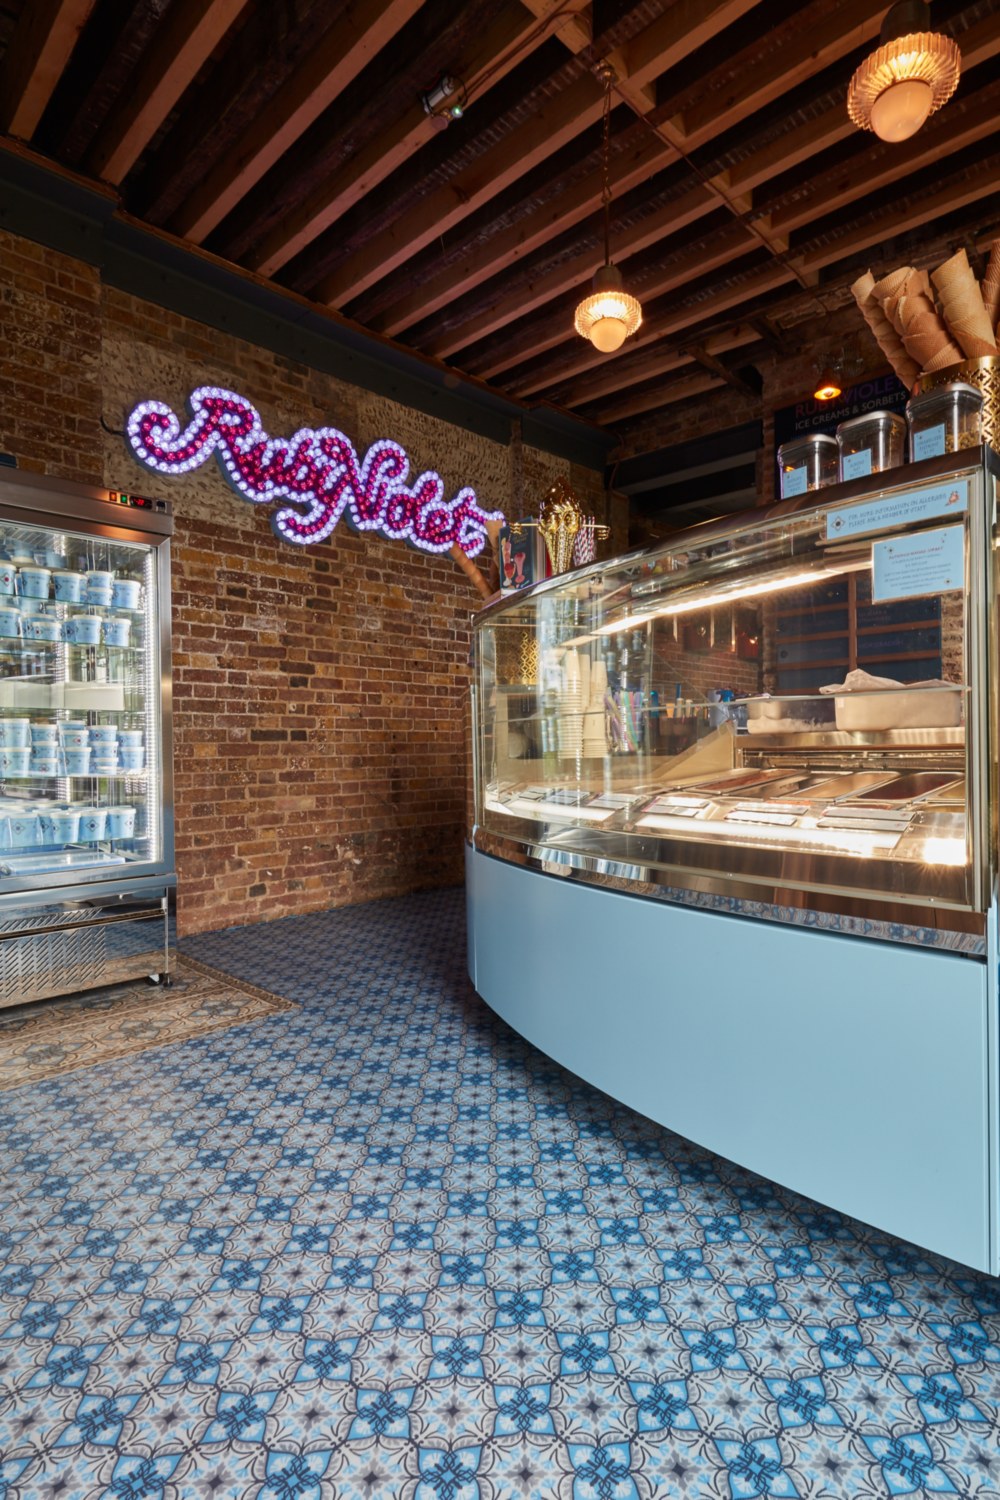 A patterned resin floor in an ice cream shop